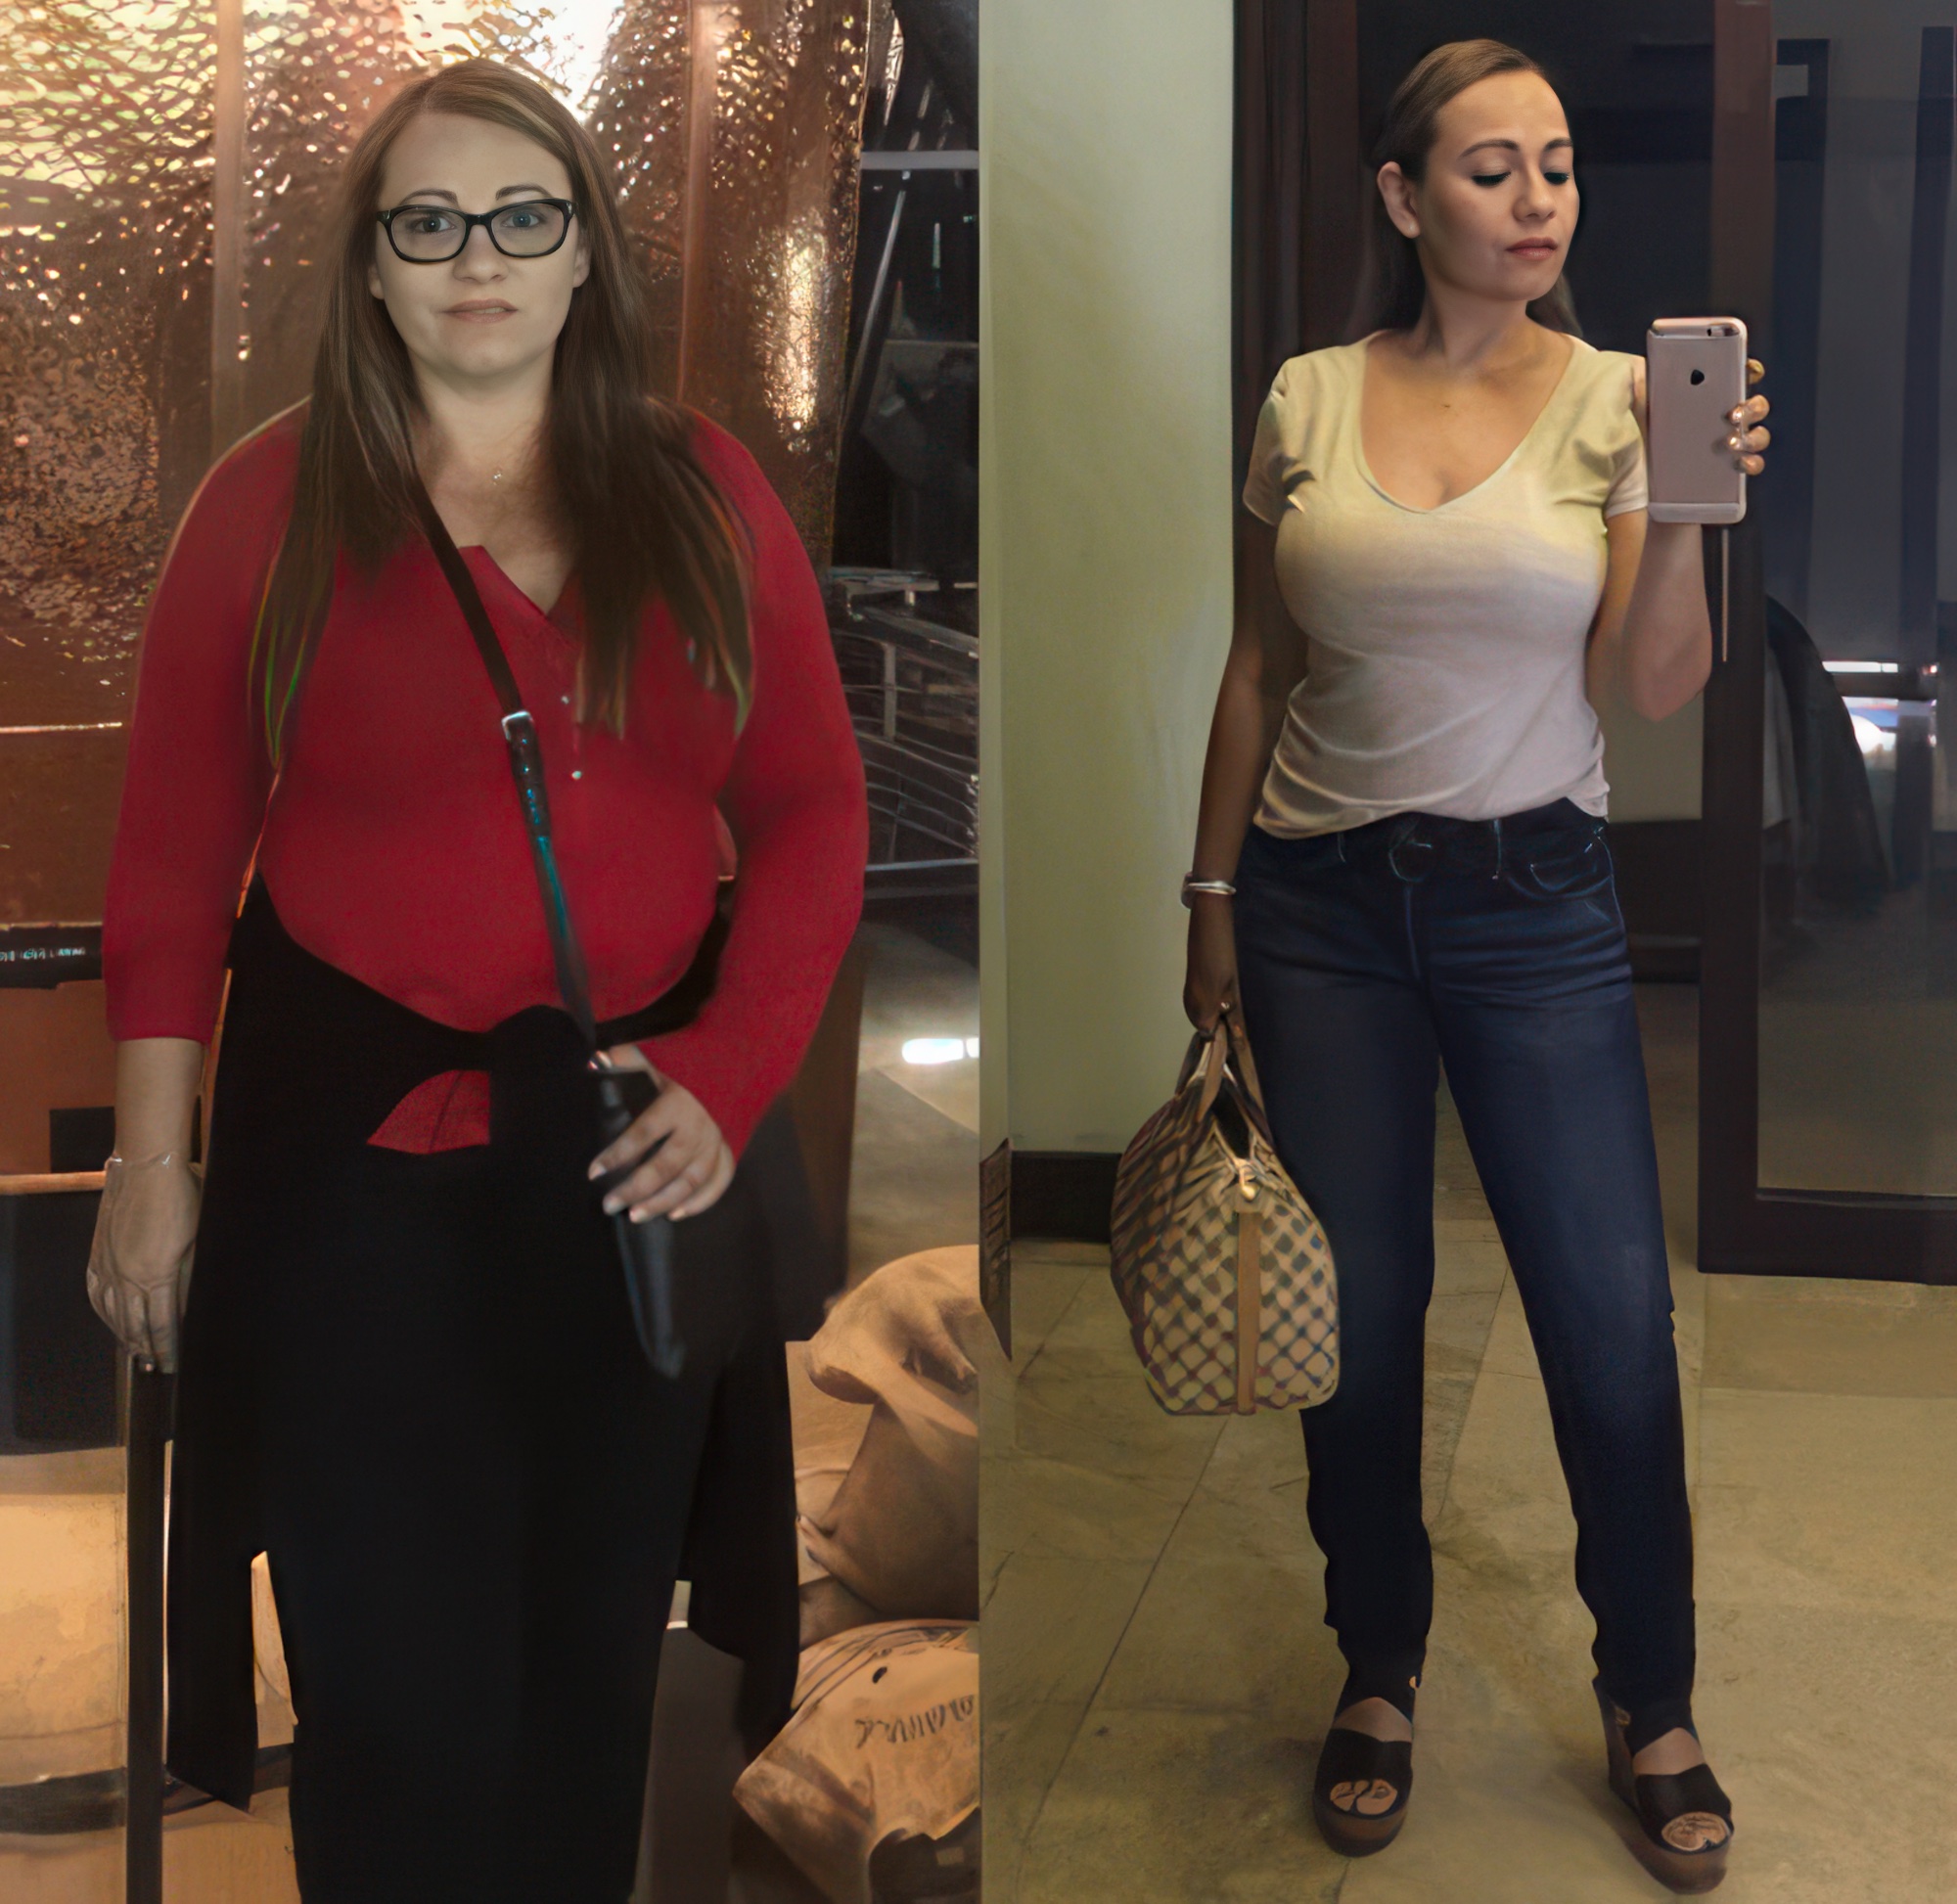 Tijuana Gastric Sleeve Surgery Before and After Photos: Patient Success  Stories